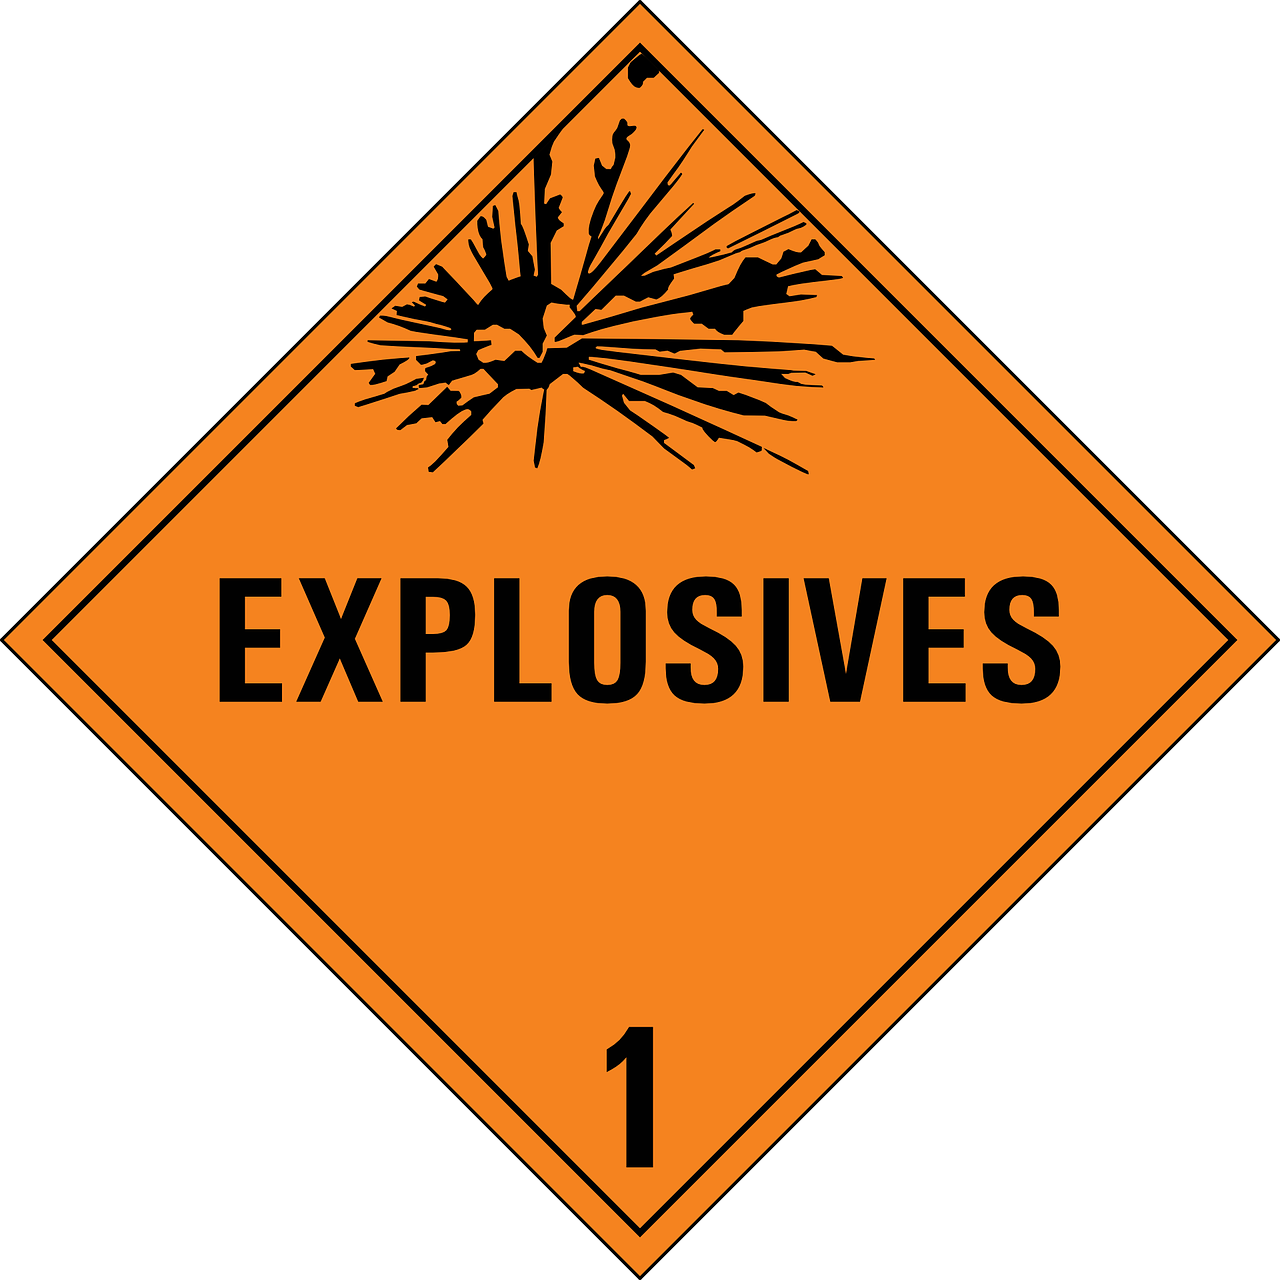 explosives-40808_1280.png